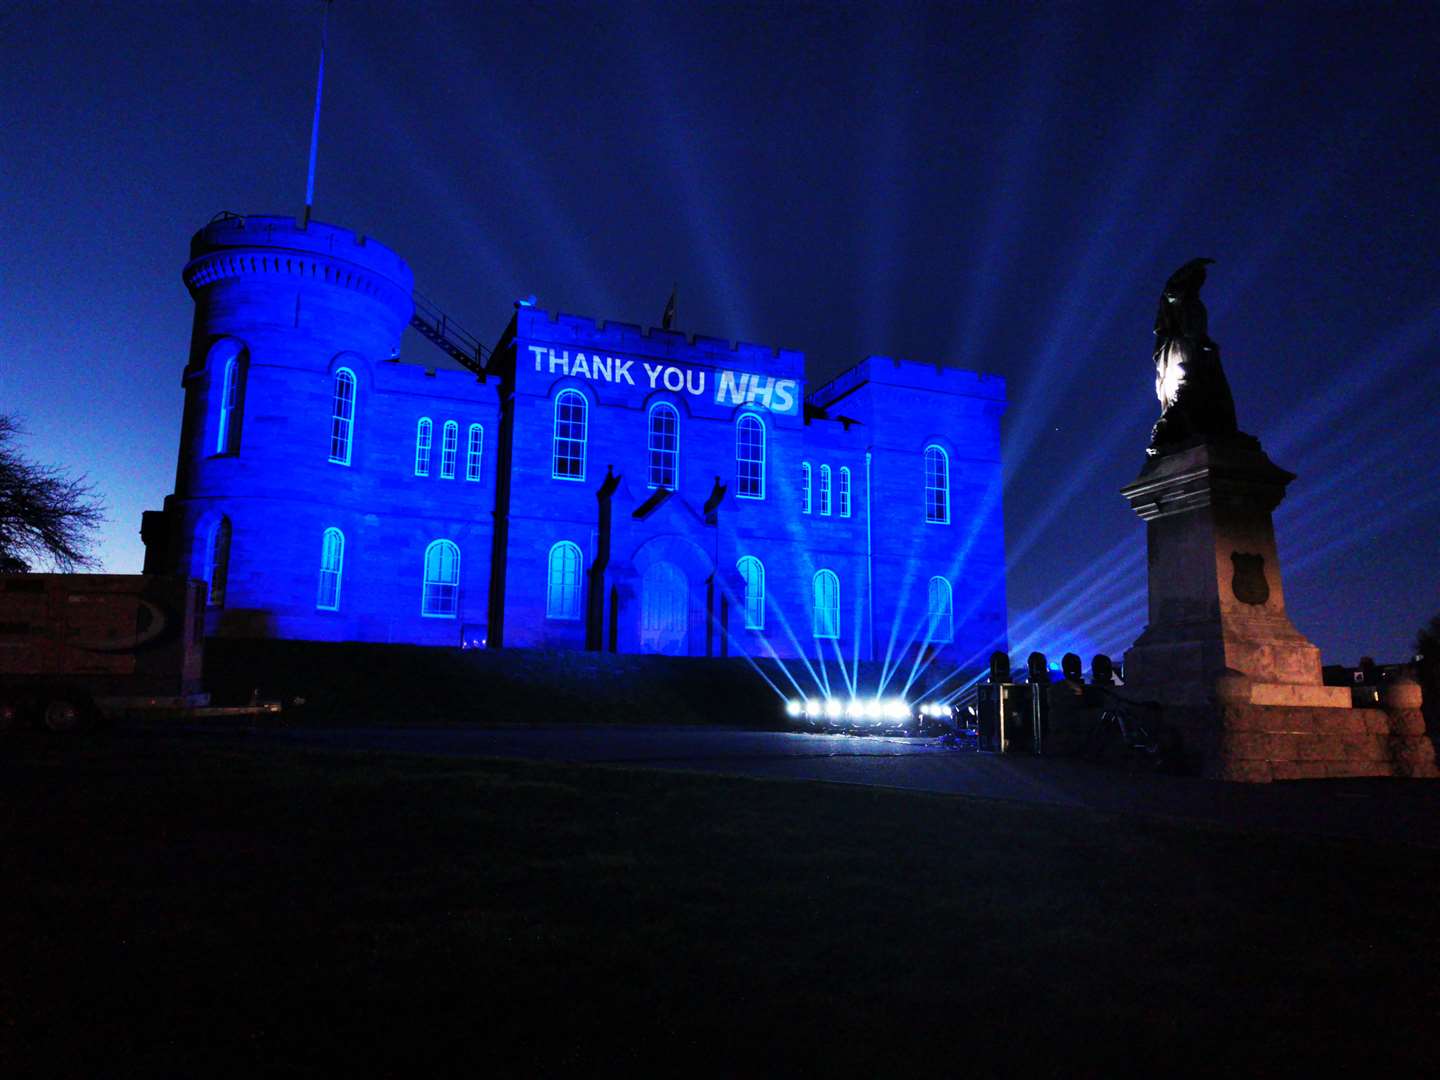 Inverness Castle was previously lit up as a thank you to NHS staff during lockdown. Photo: Craig Duncan of Limelight Event Services